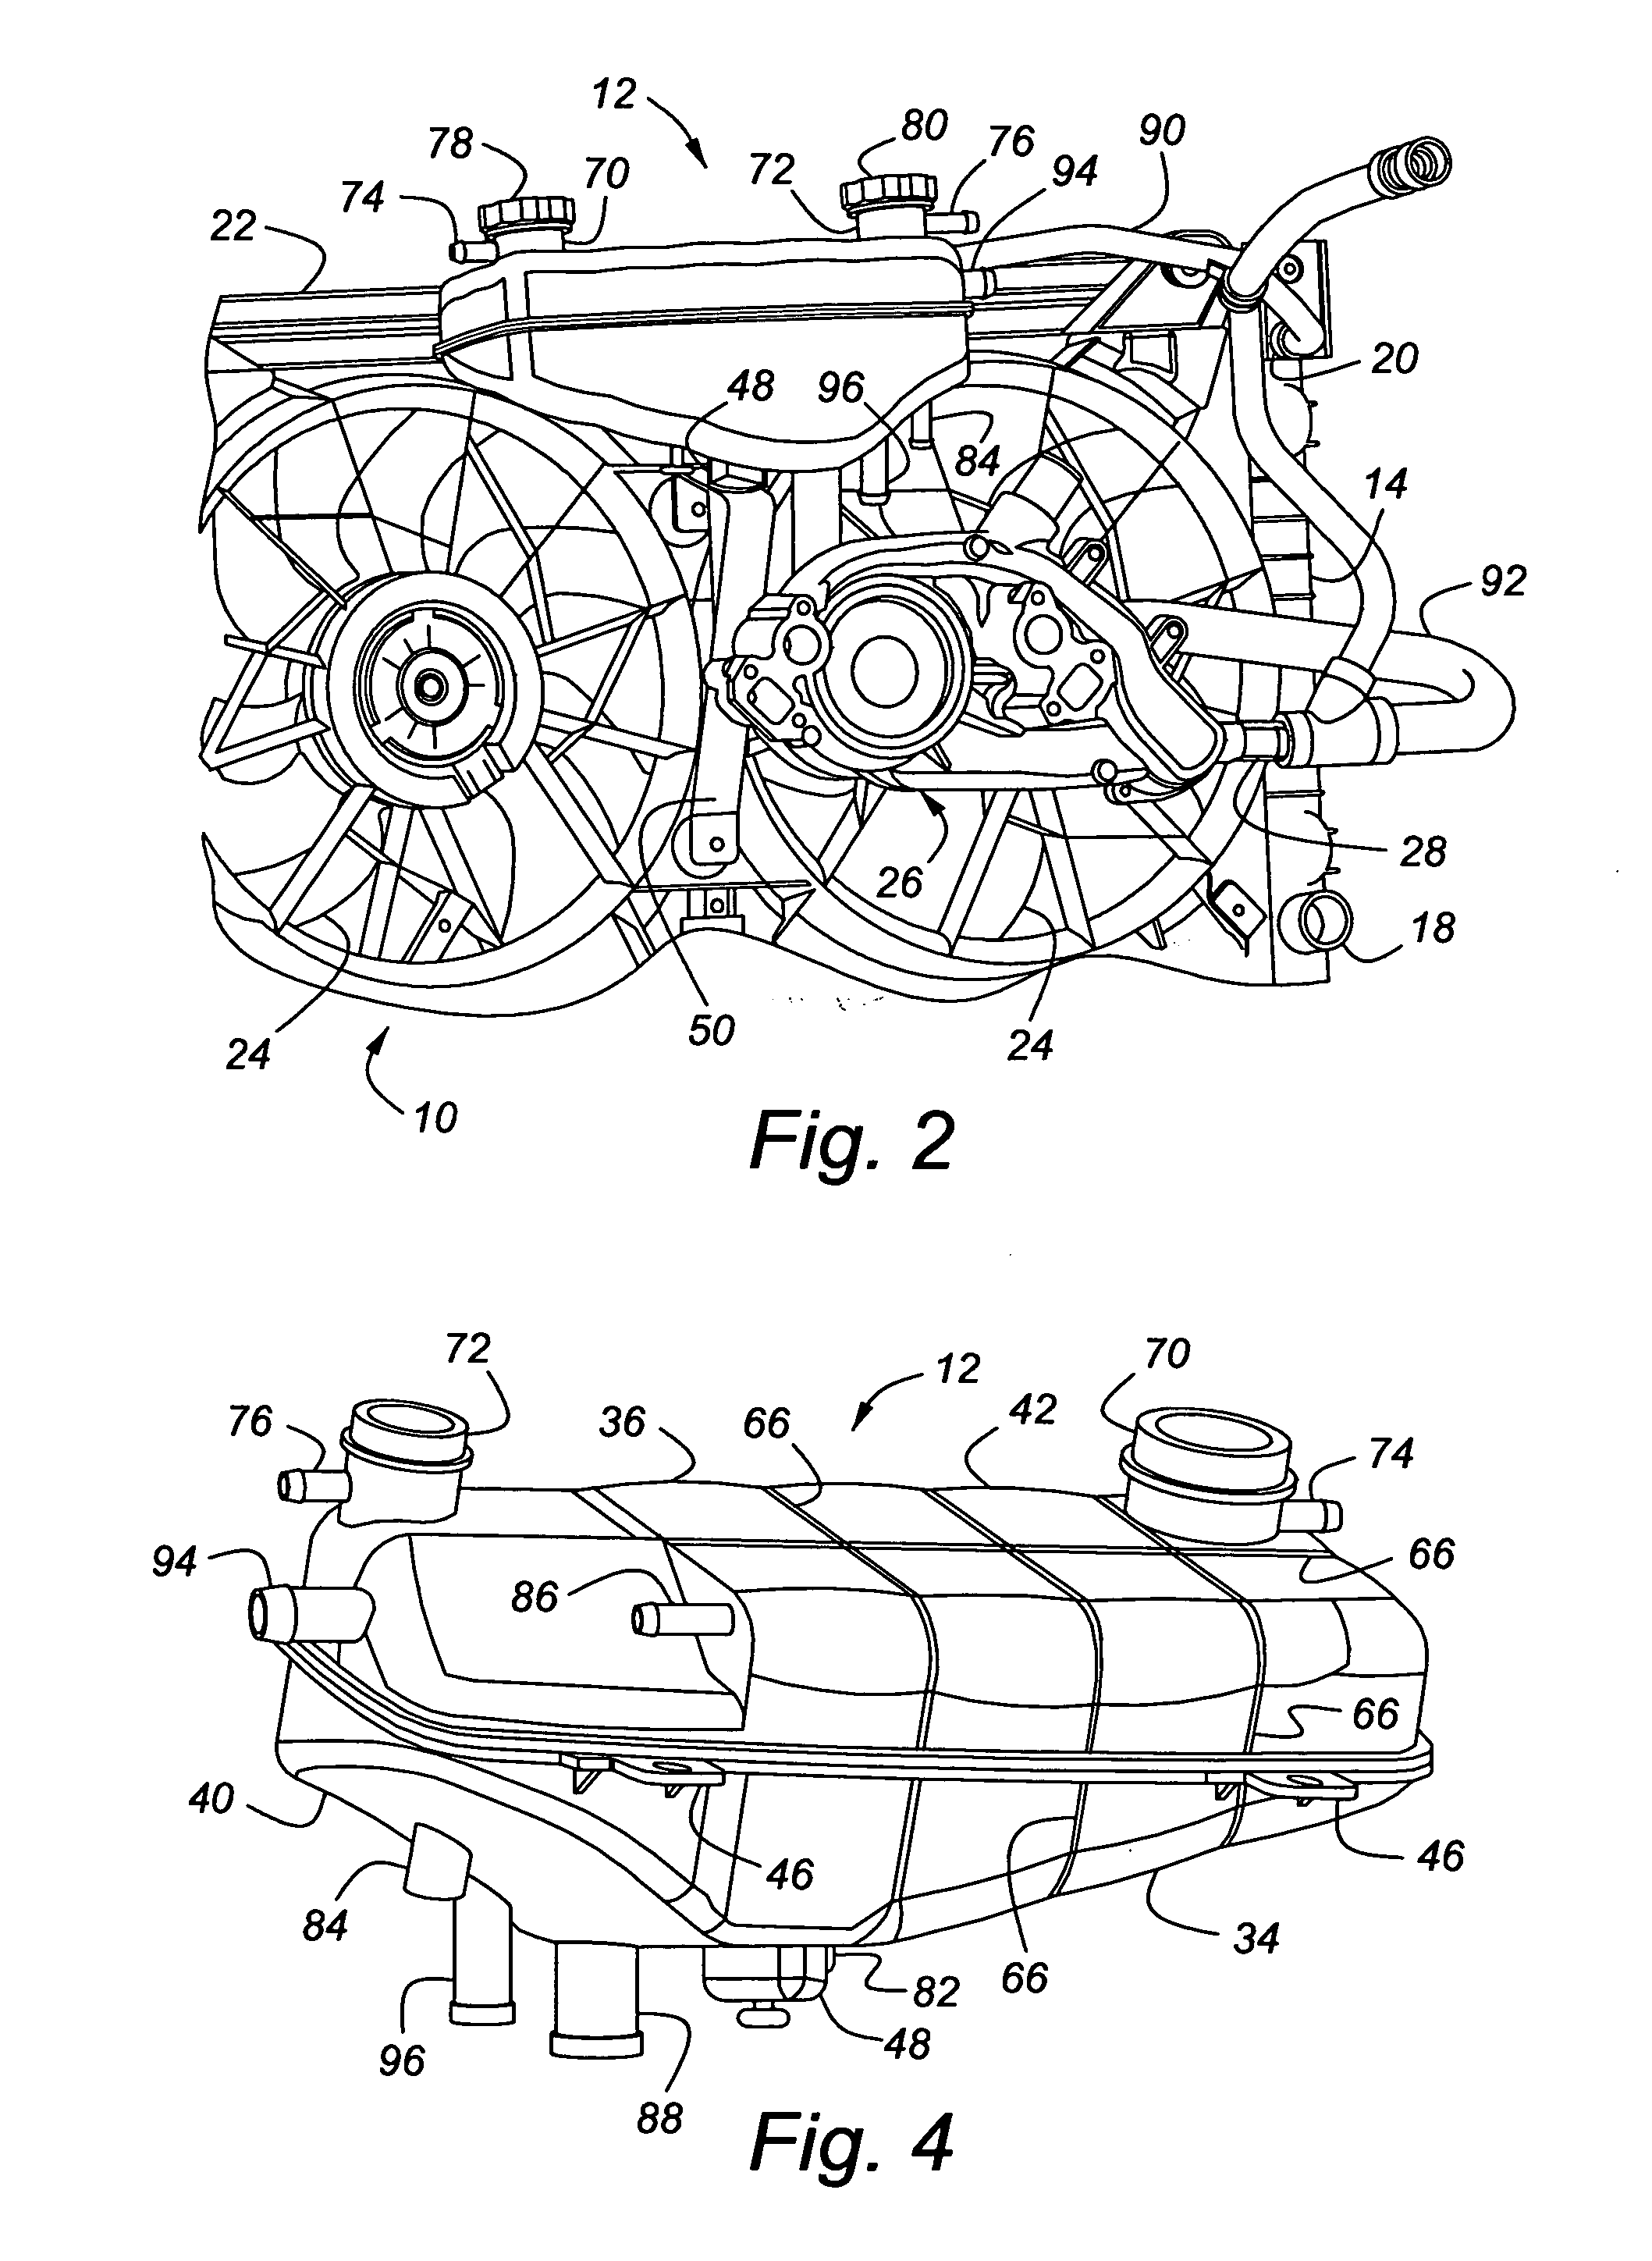 Dual surge tank for vehicle cooling system